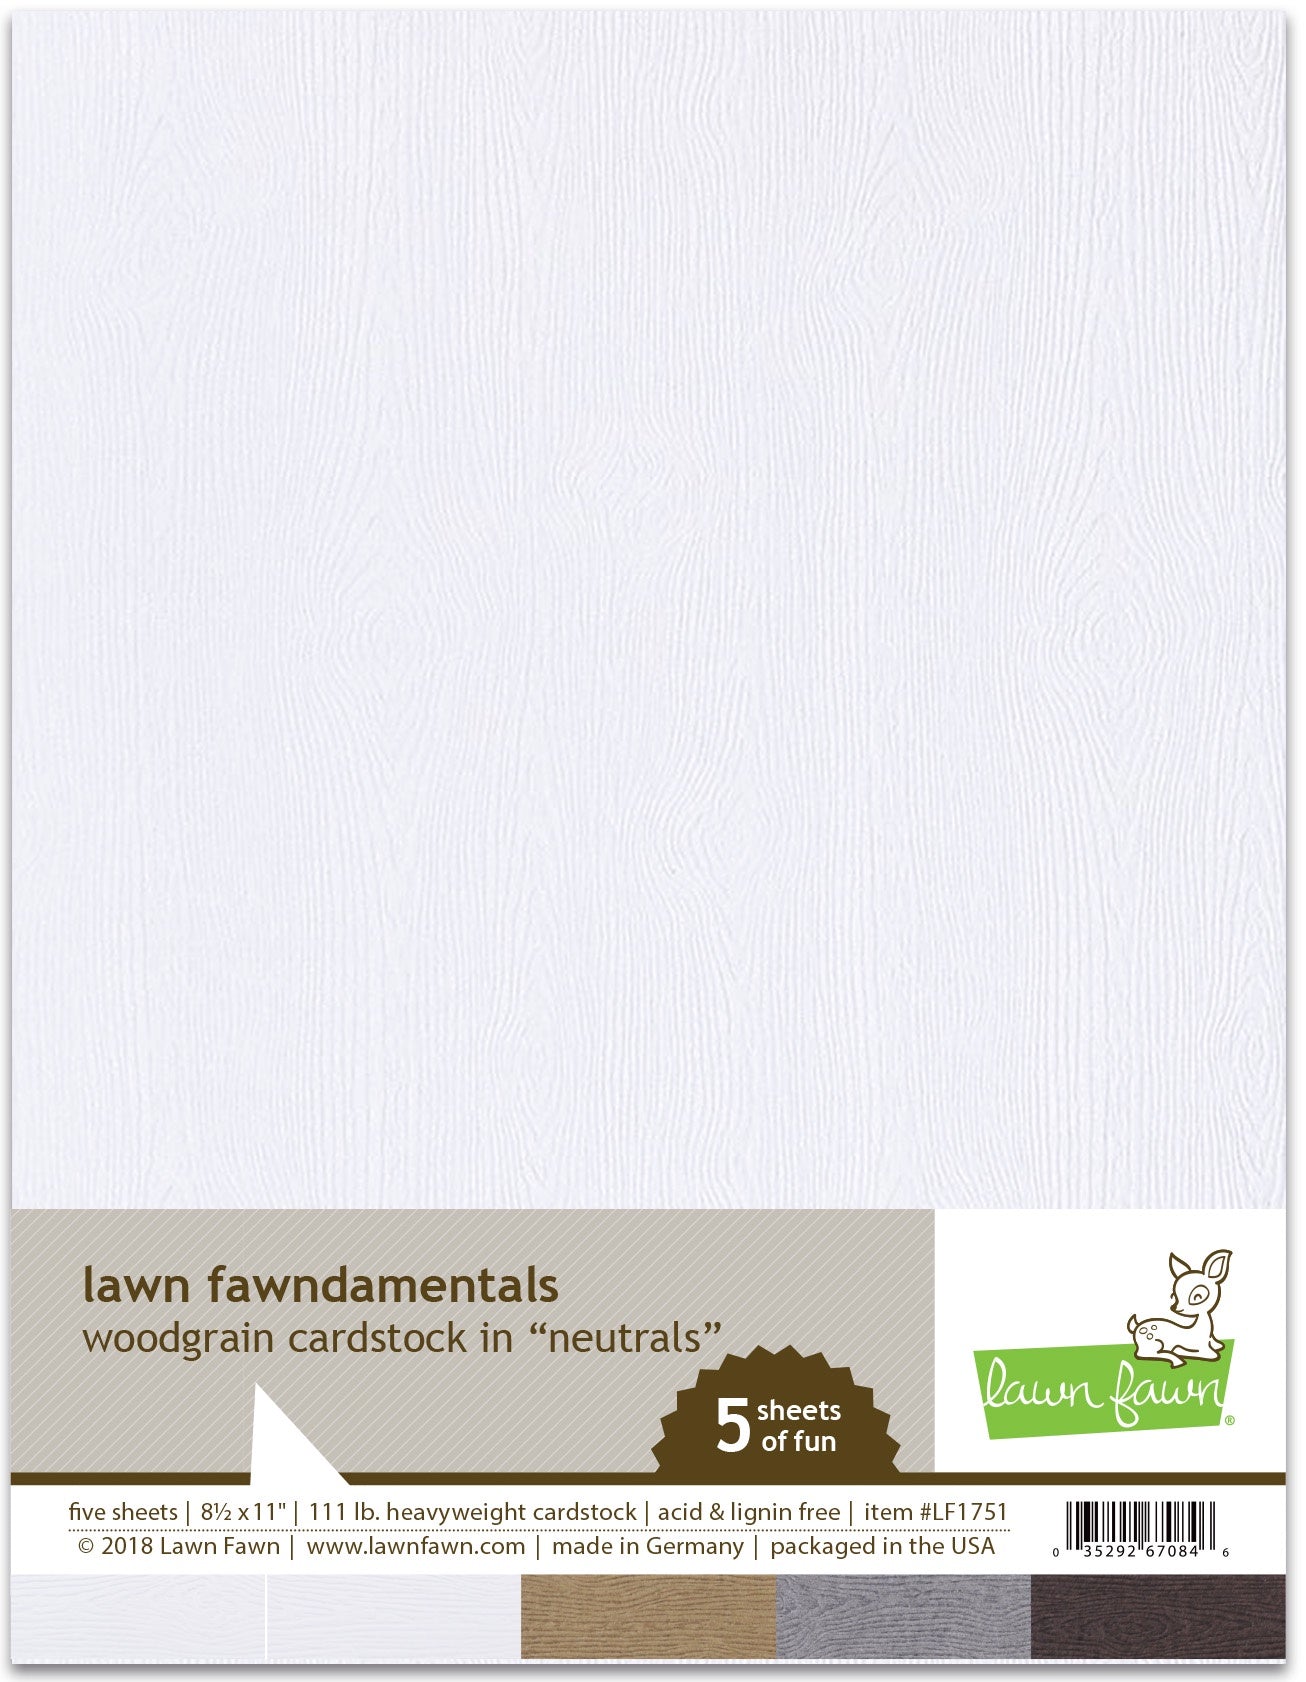 Lawn Fawn - 8.5x11 specialty paper - White Woodgrain Cardstock